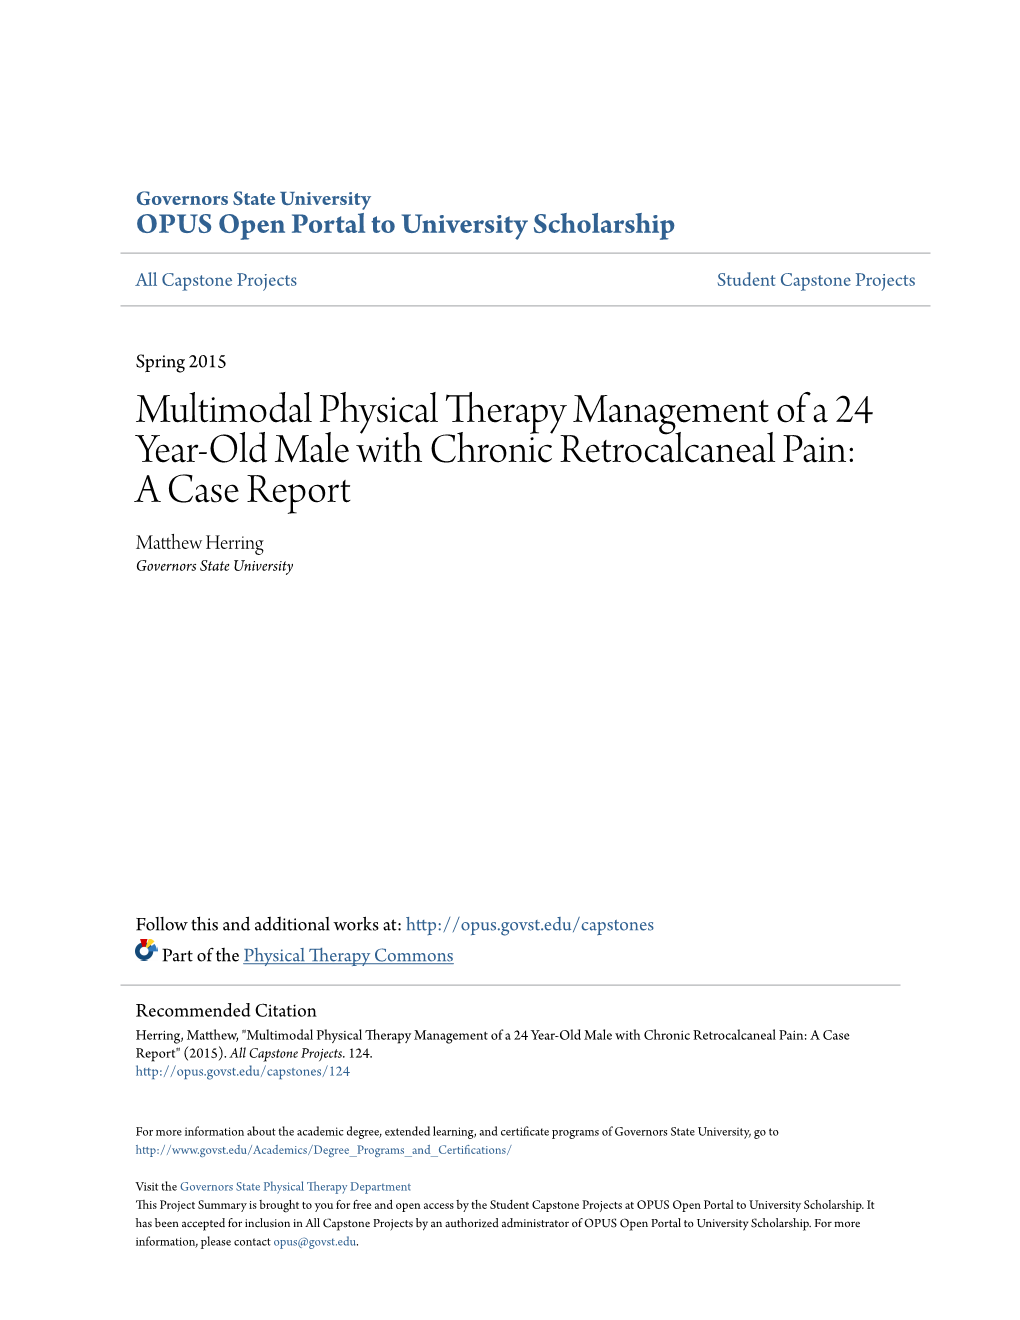 Multimodal Physical Therapy Management of a 24 Year-Old Male with Chronic Retrocalcaneal Pain: a Case Report Matthew Eh Rring Governors State University